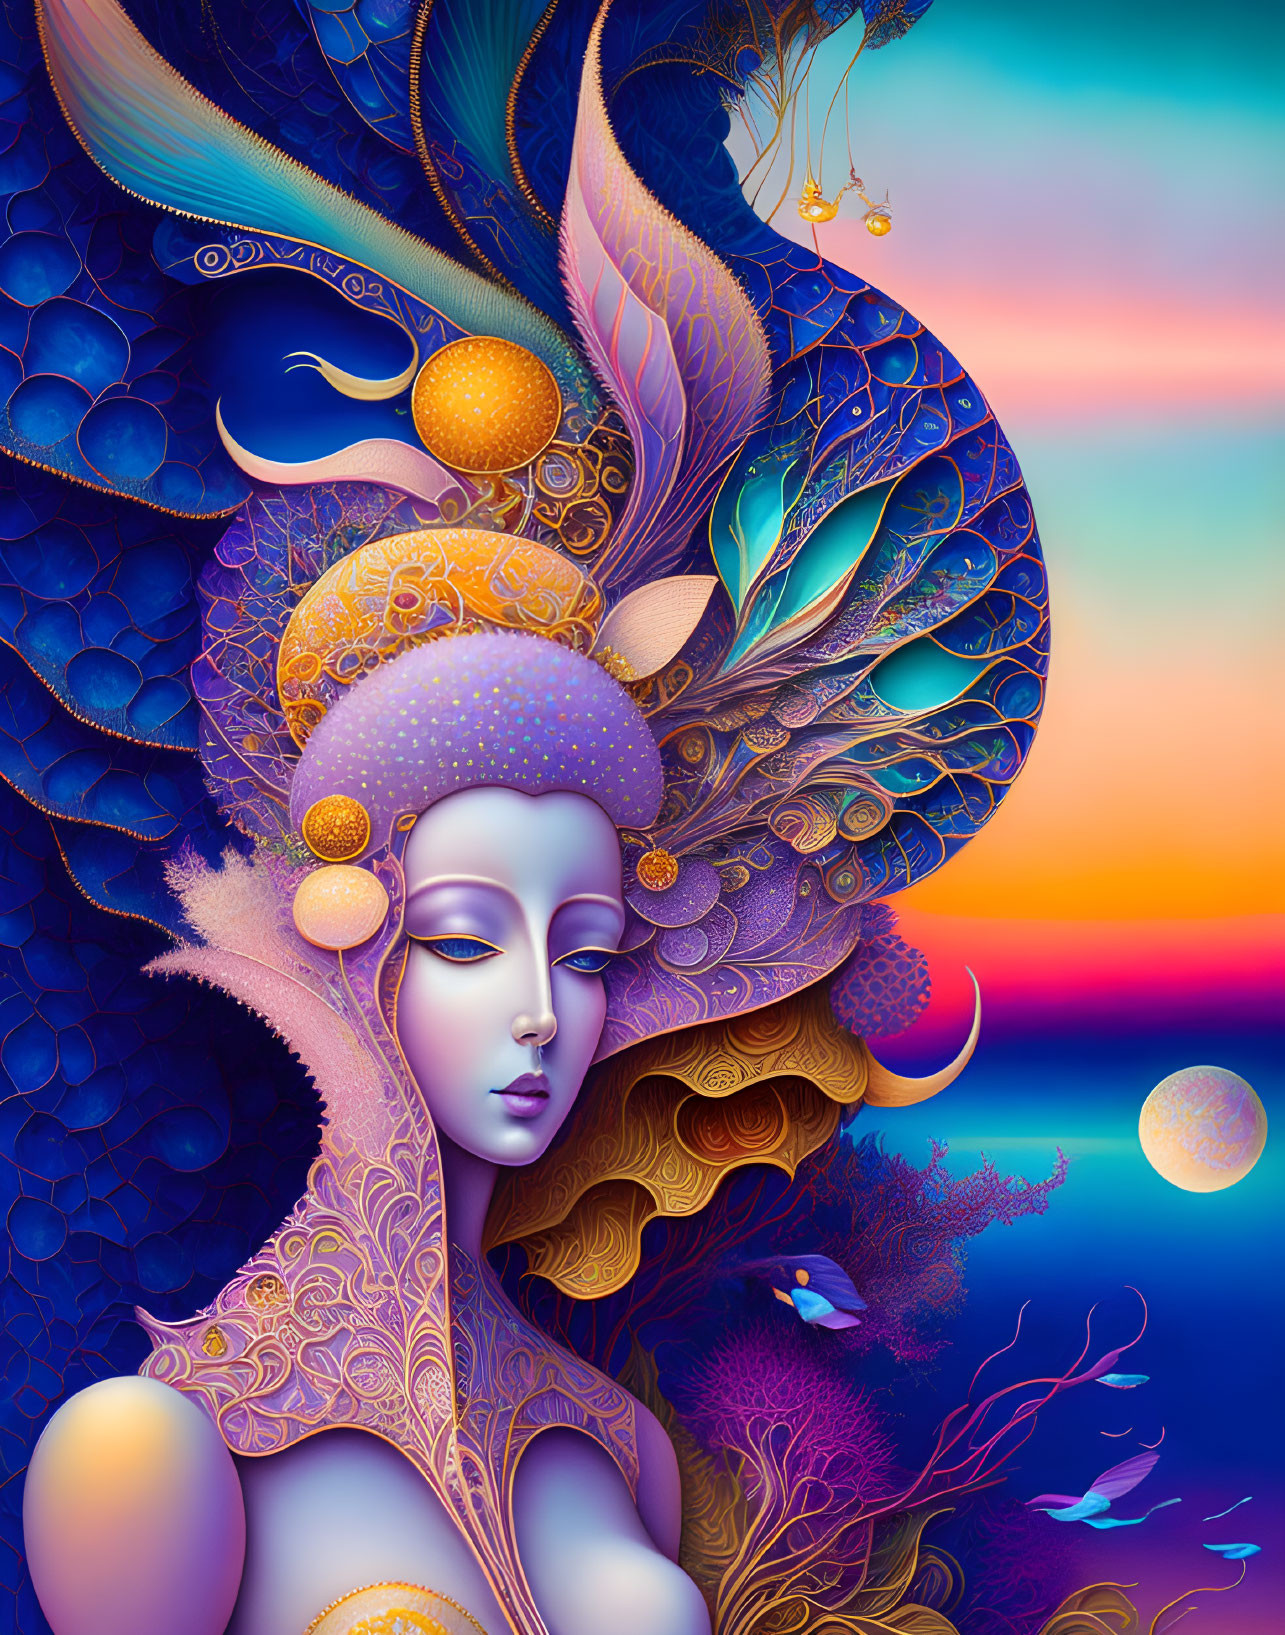 Digital artwork: Woman with peacock features on sunset background